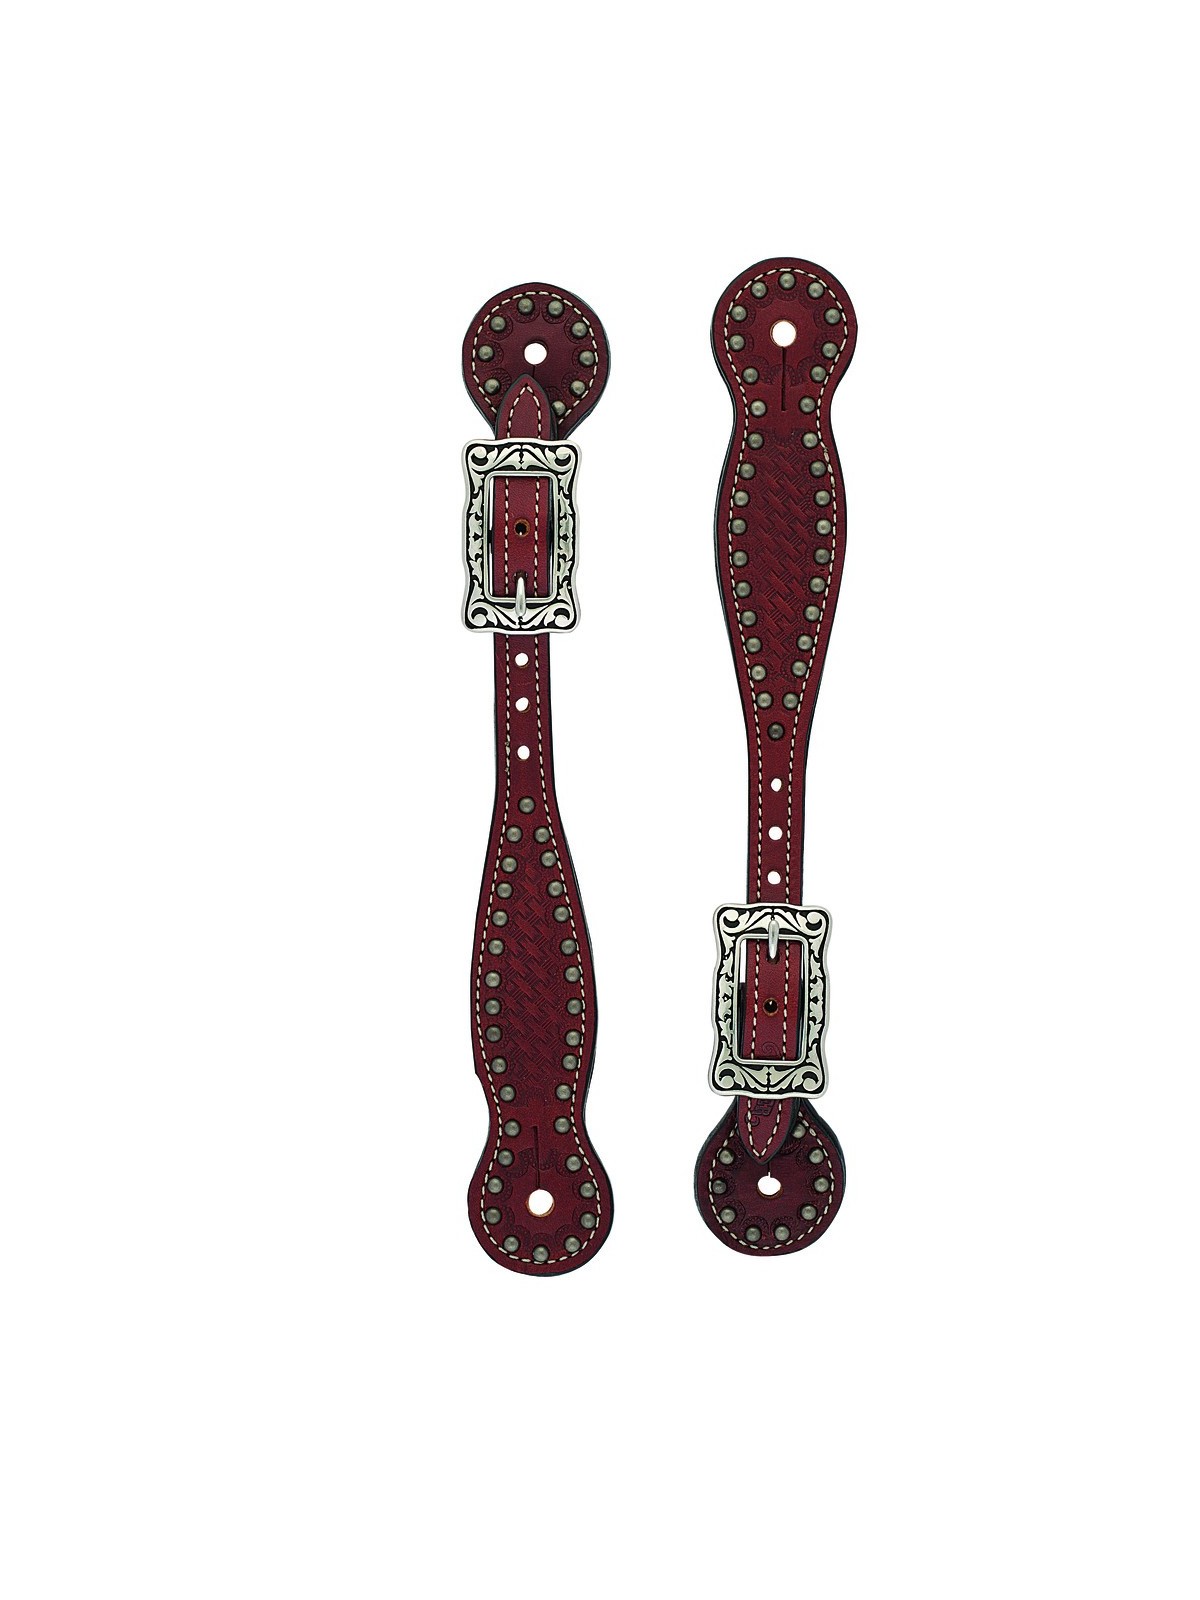 Weaver Leather Basketweave Spur Straps with Spots 30-0296-CH